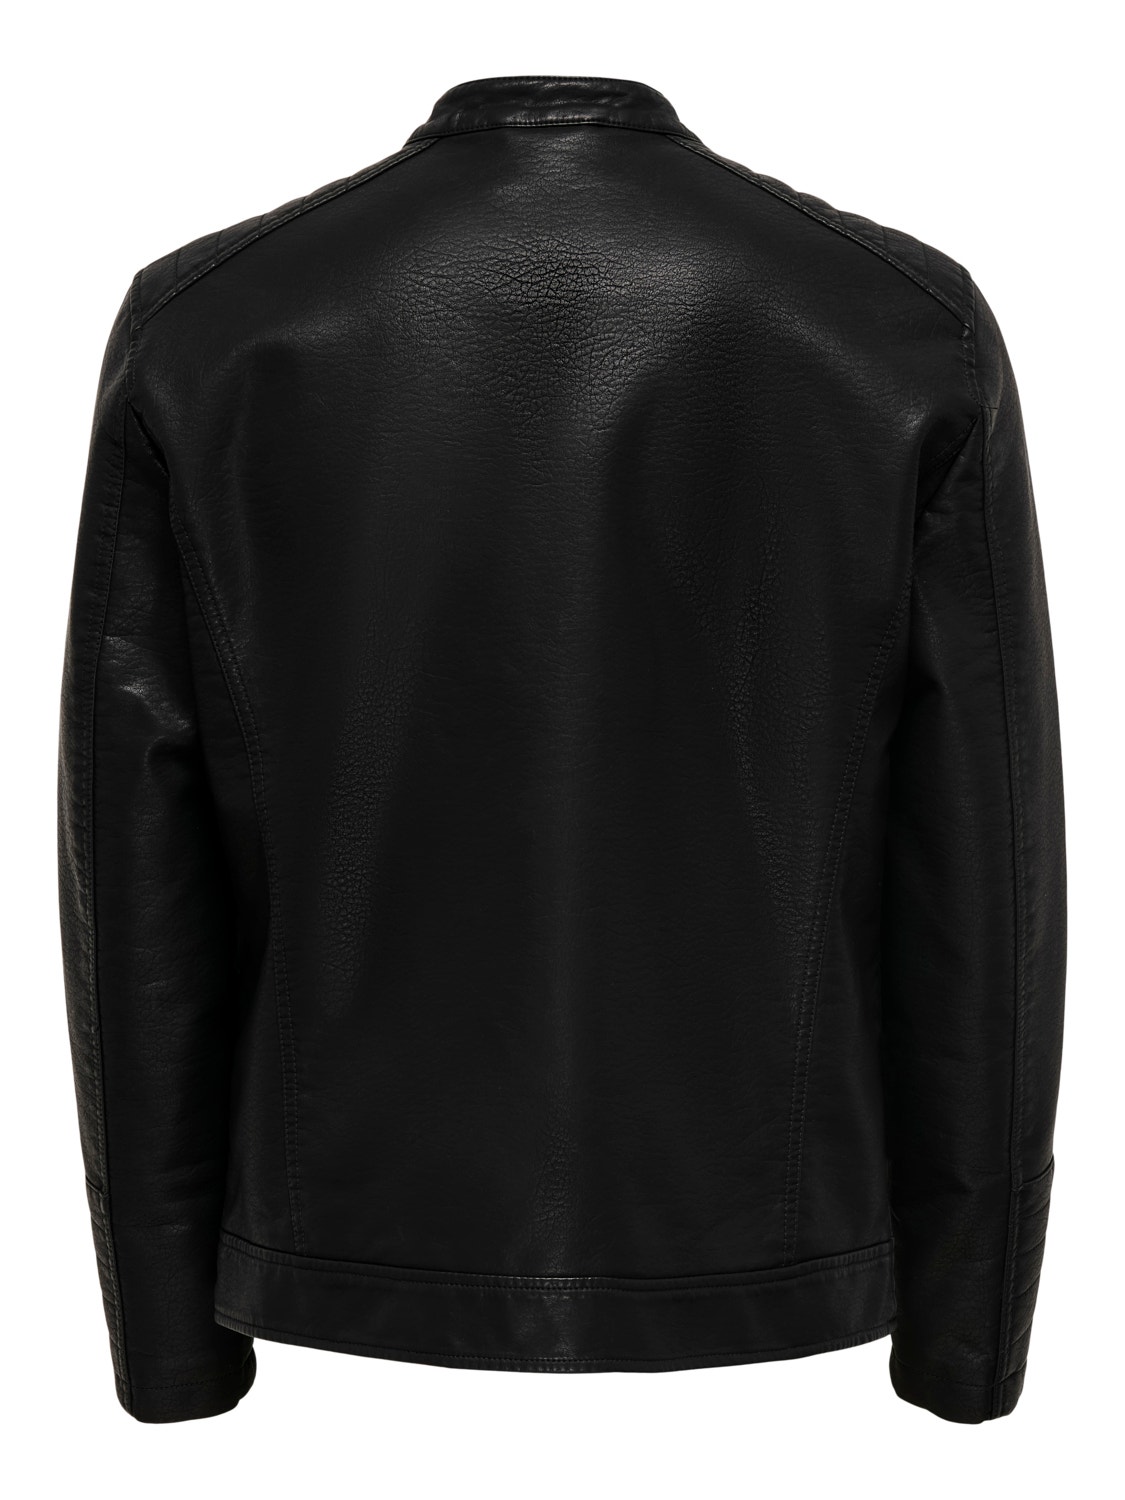 ONLY & SONS Jacket -Black - 22020741